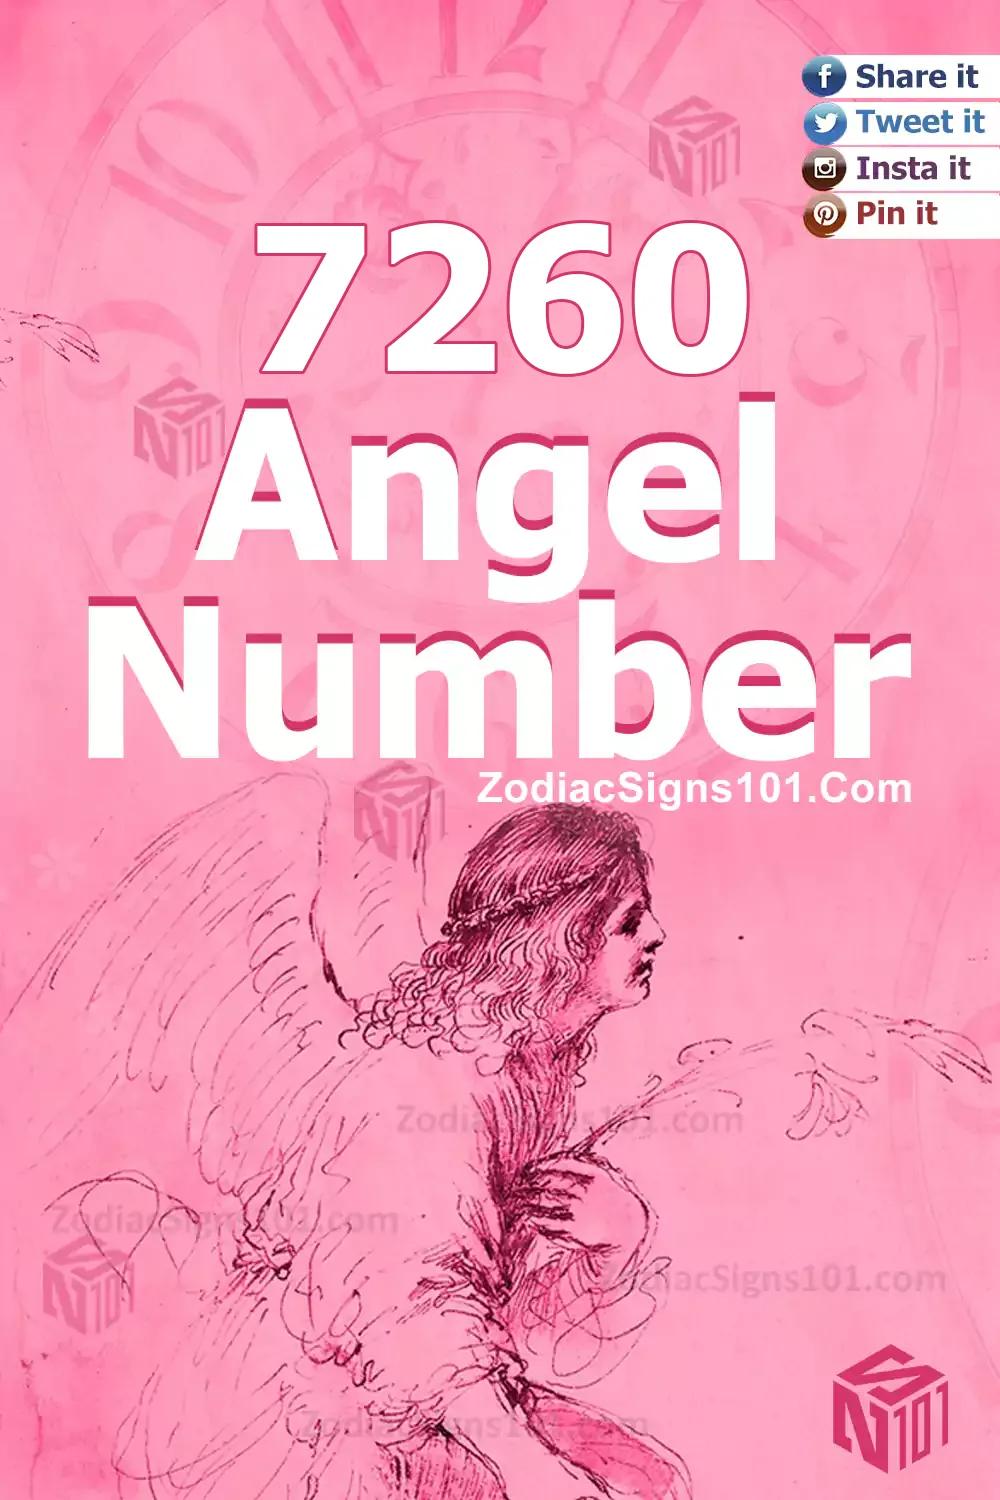 7260 Angel Number Meaning